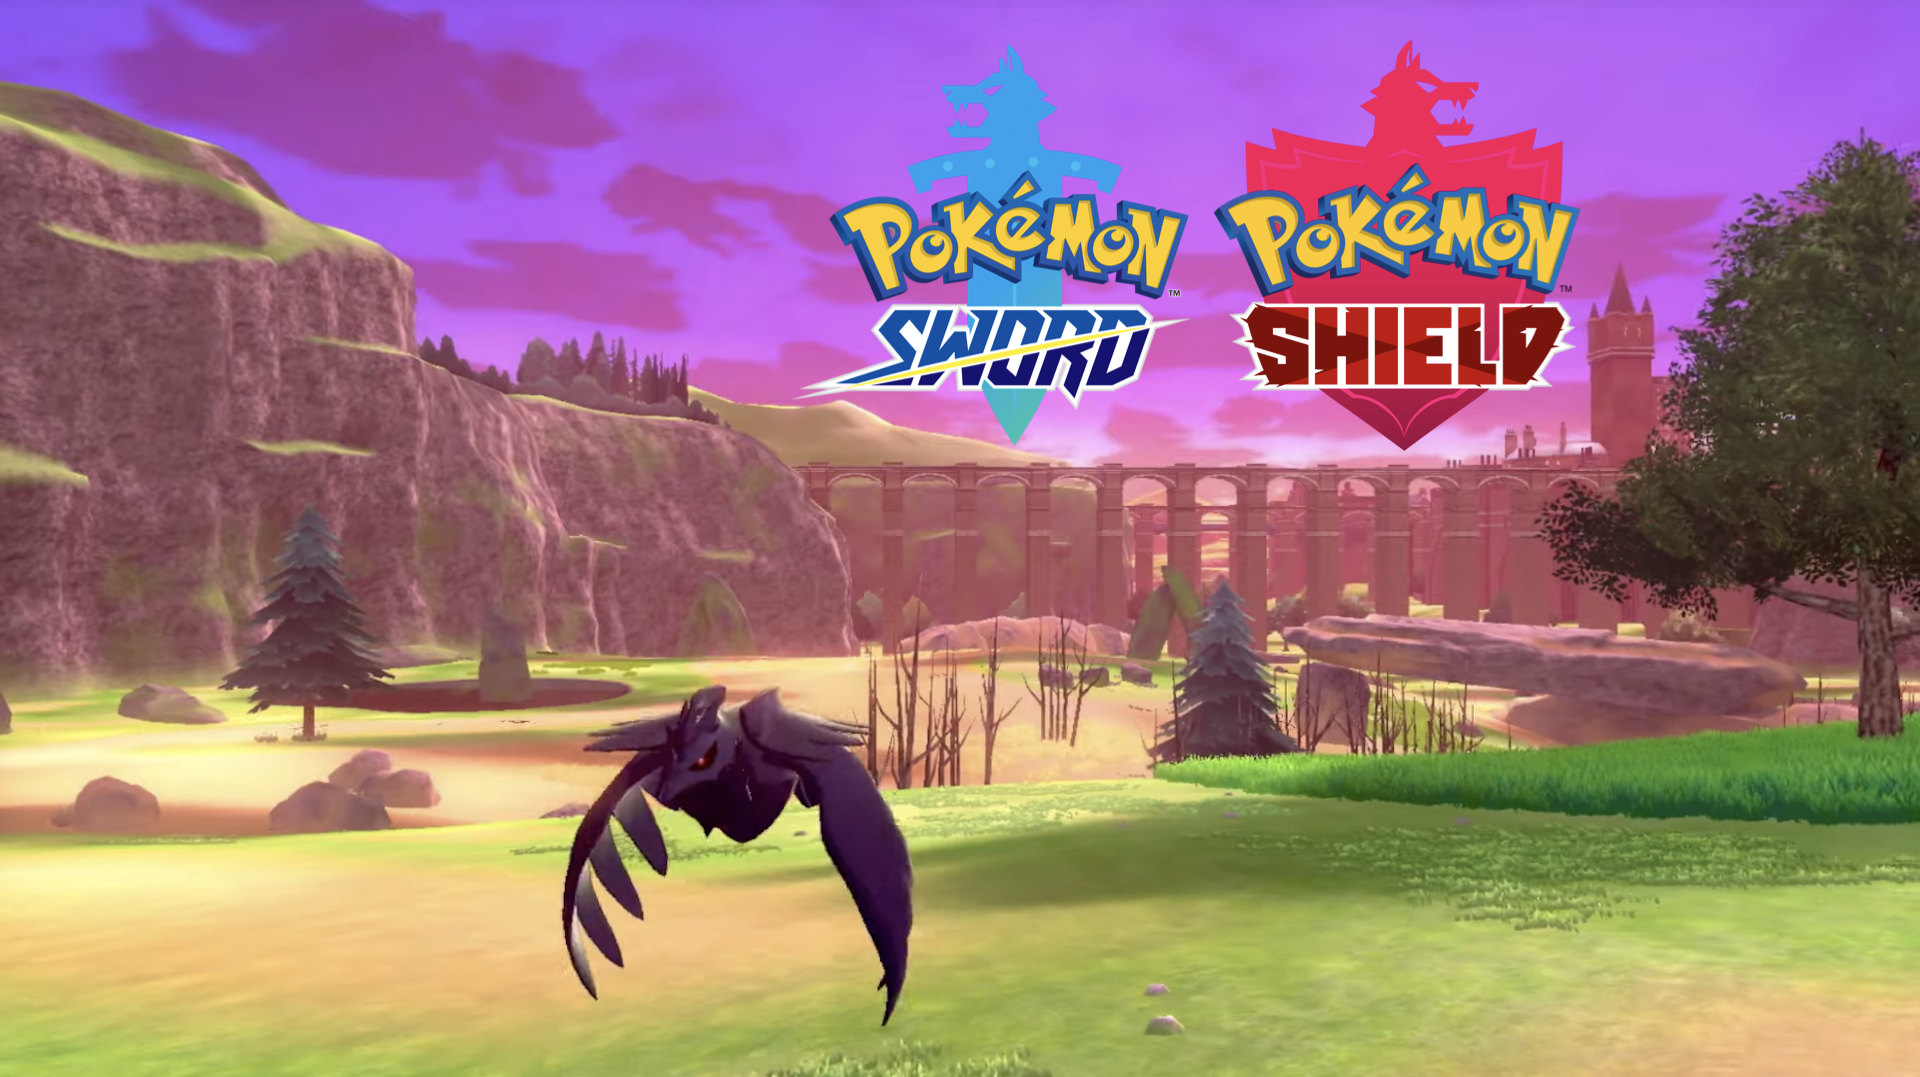 Pokemon Sword And Shield Receiving New Info On August 7th